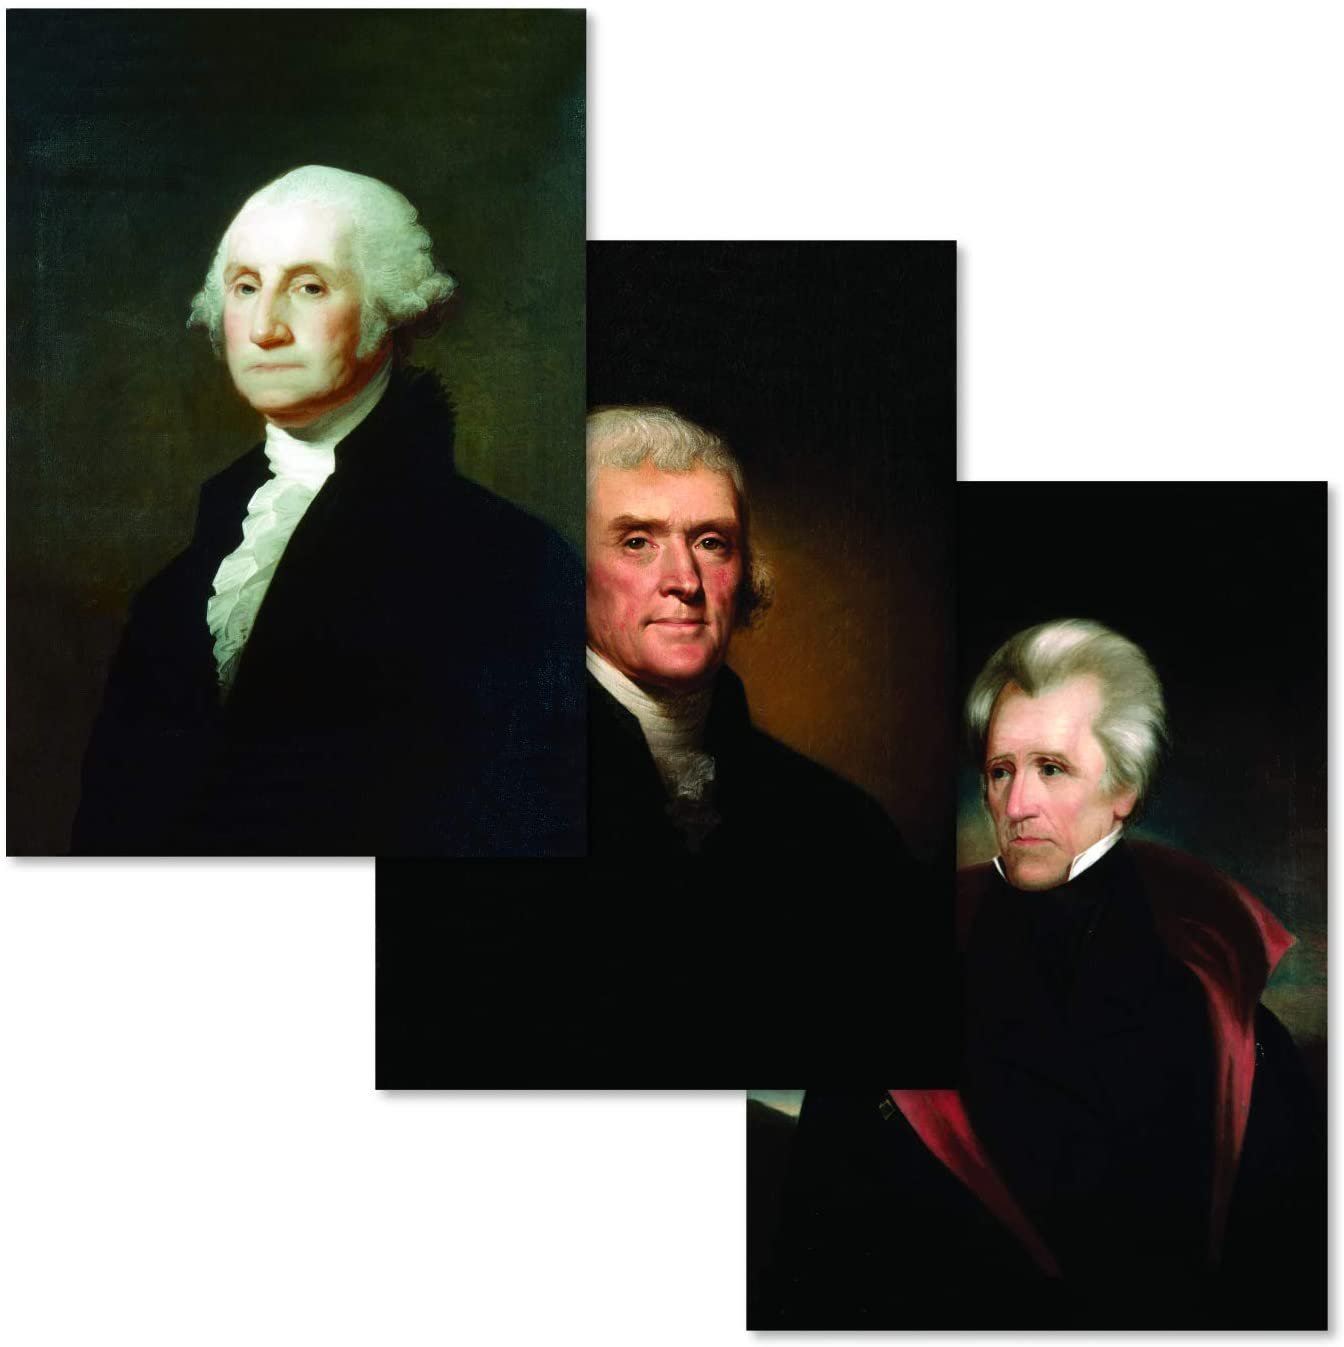 Quarterhouse Early US President Portraits - Washington, Jefferson, and Jackson Poster Set, Social Studies Classroom Learning Materials for K-12 Students and Teachers, Set of 3, 12 x 18 Inches, Extra Durable